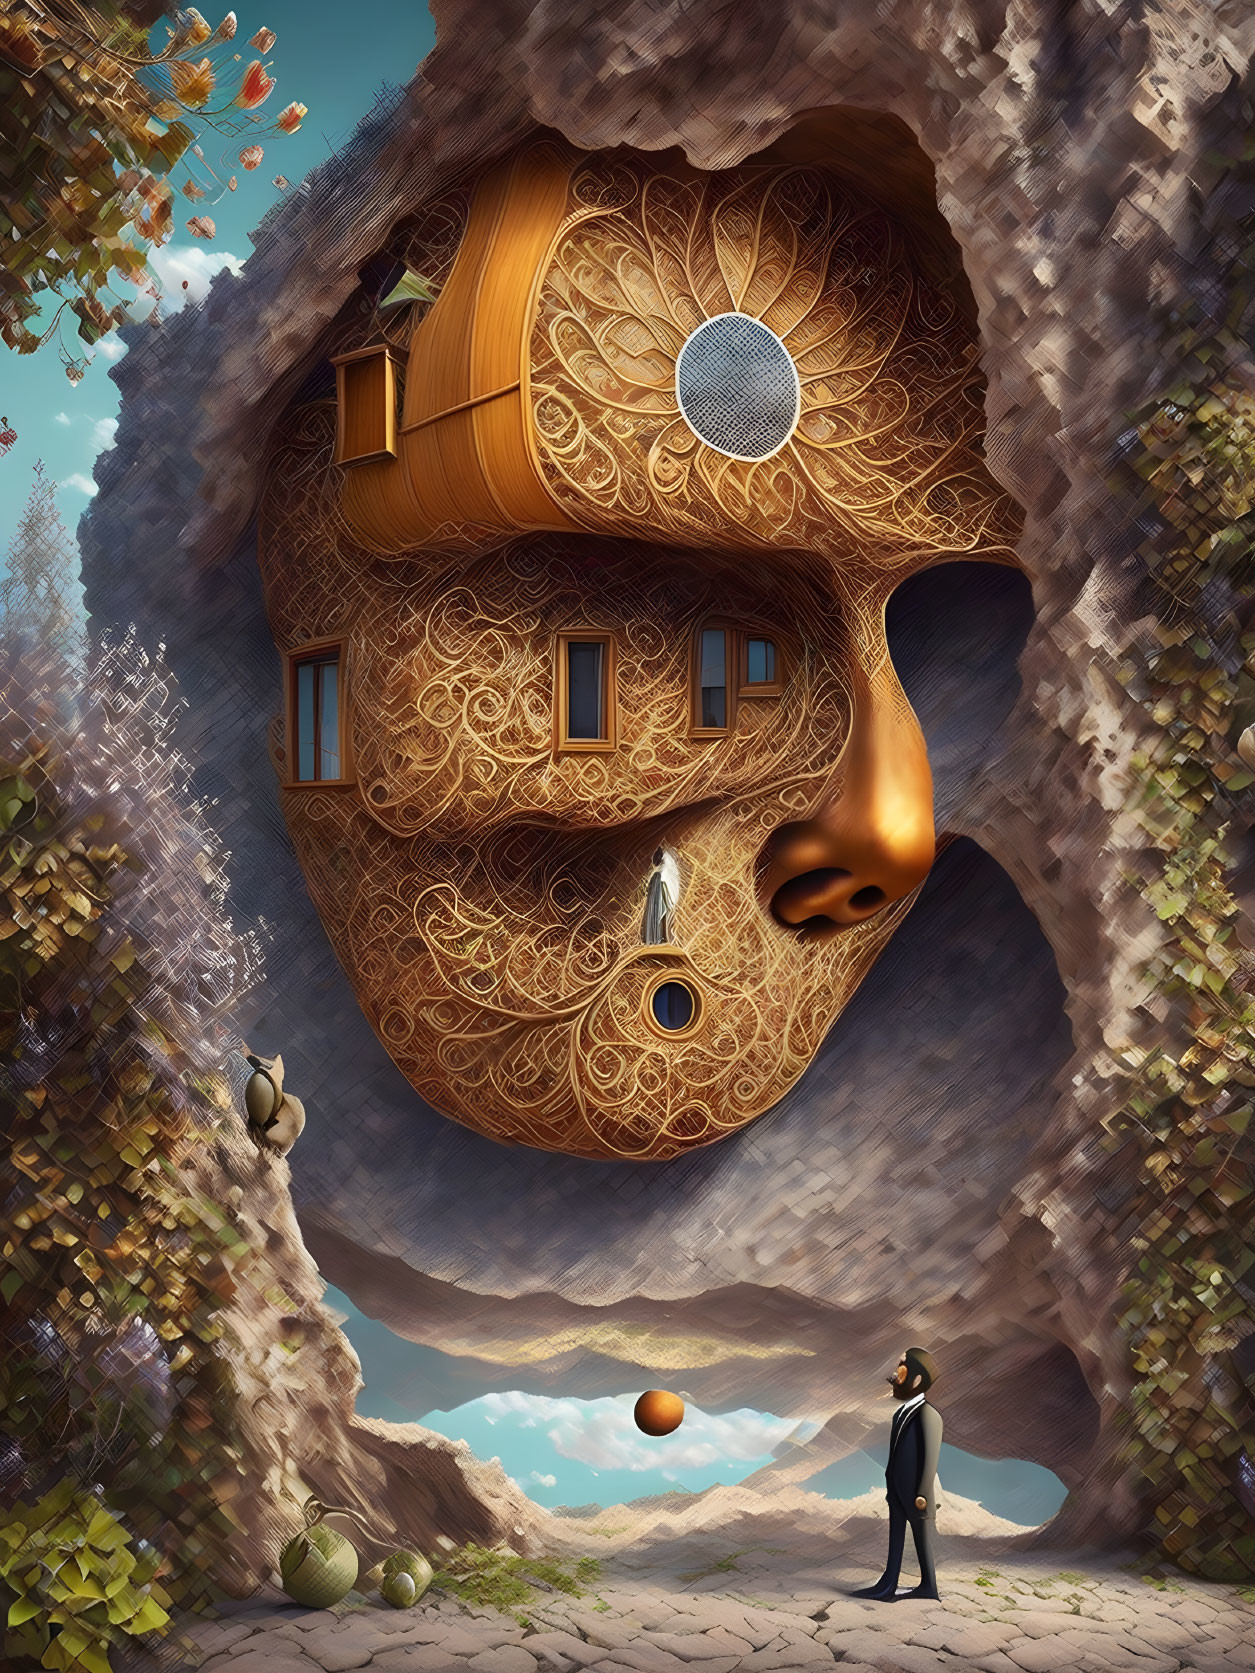 Surreal illustration: Human face-shaped house on cliff with person and floating orb